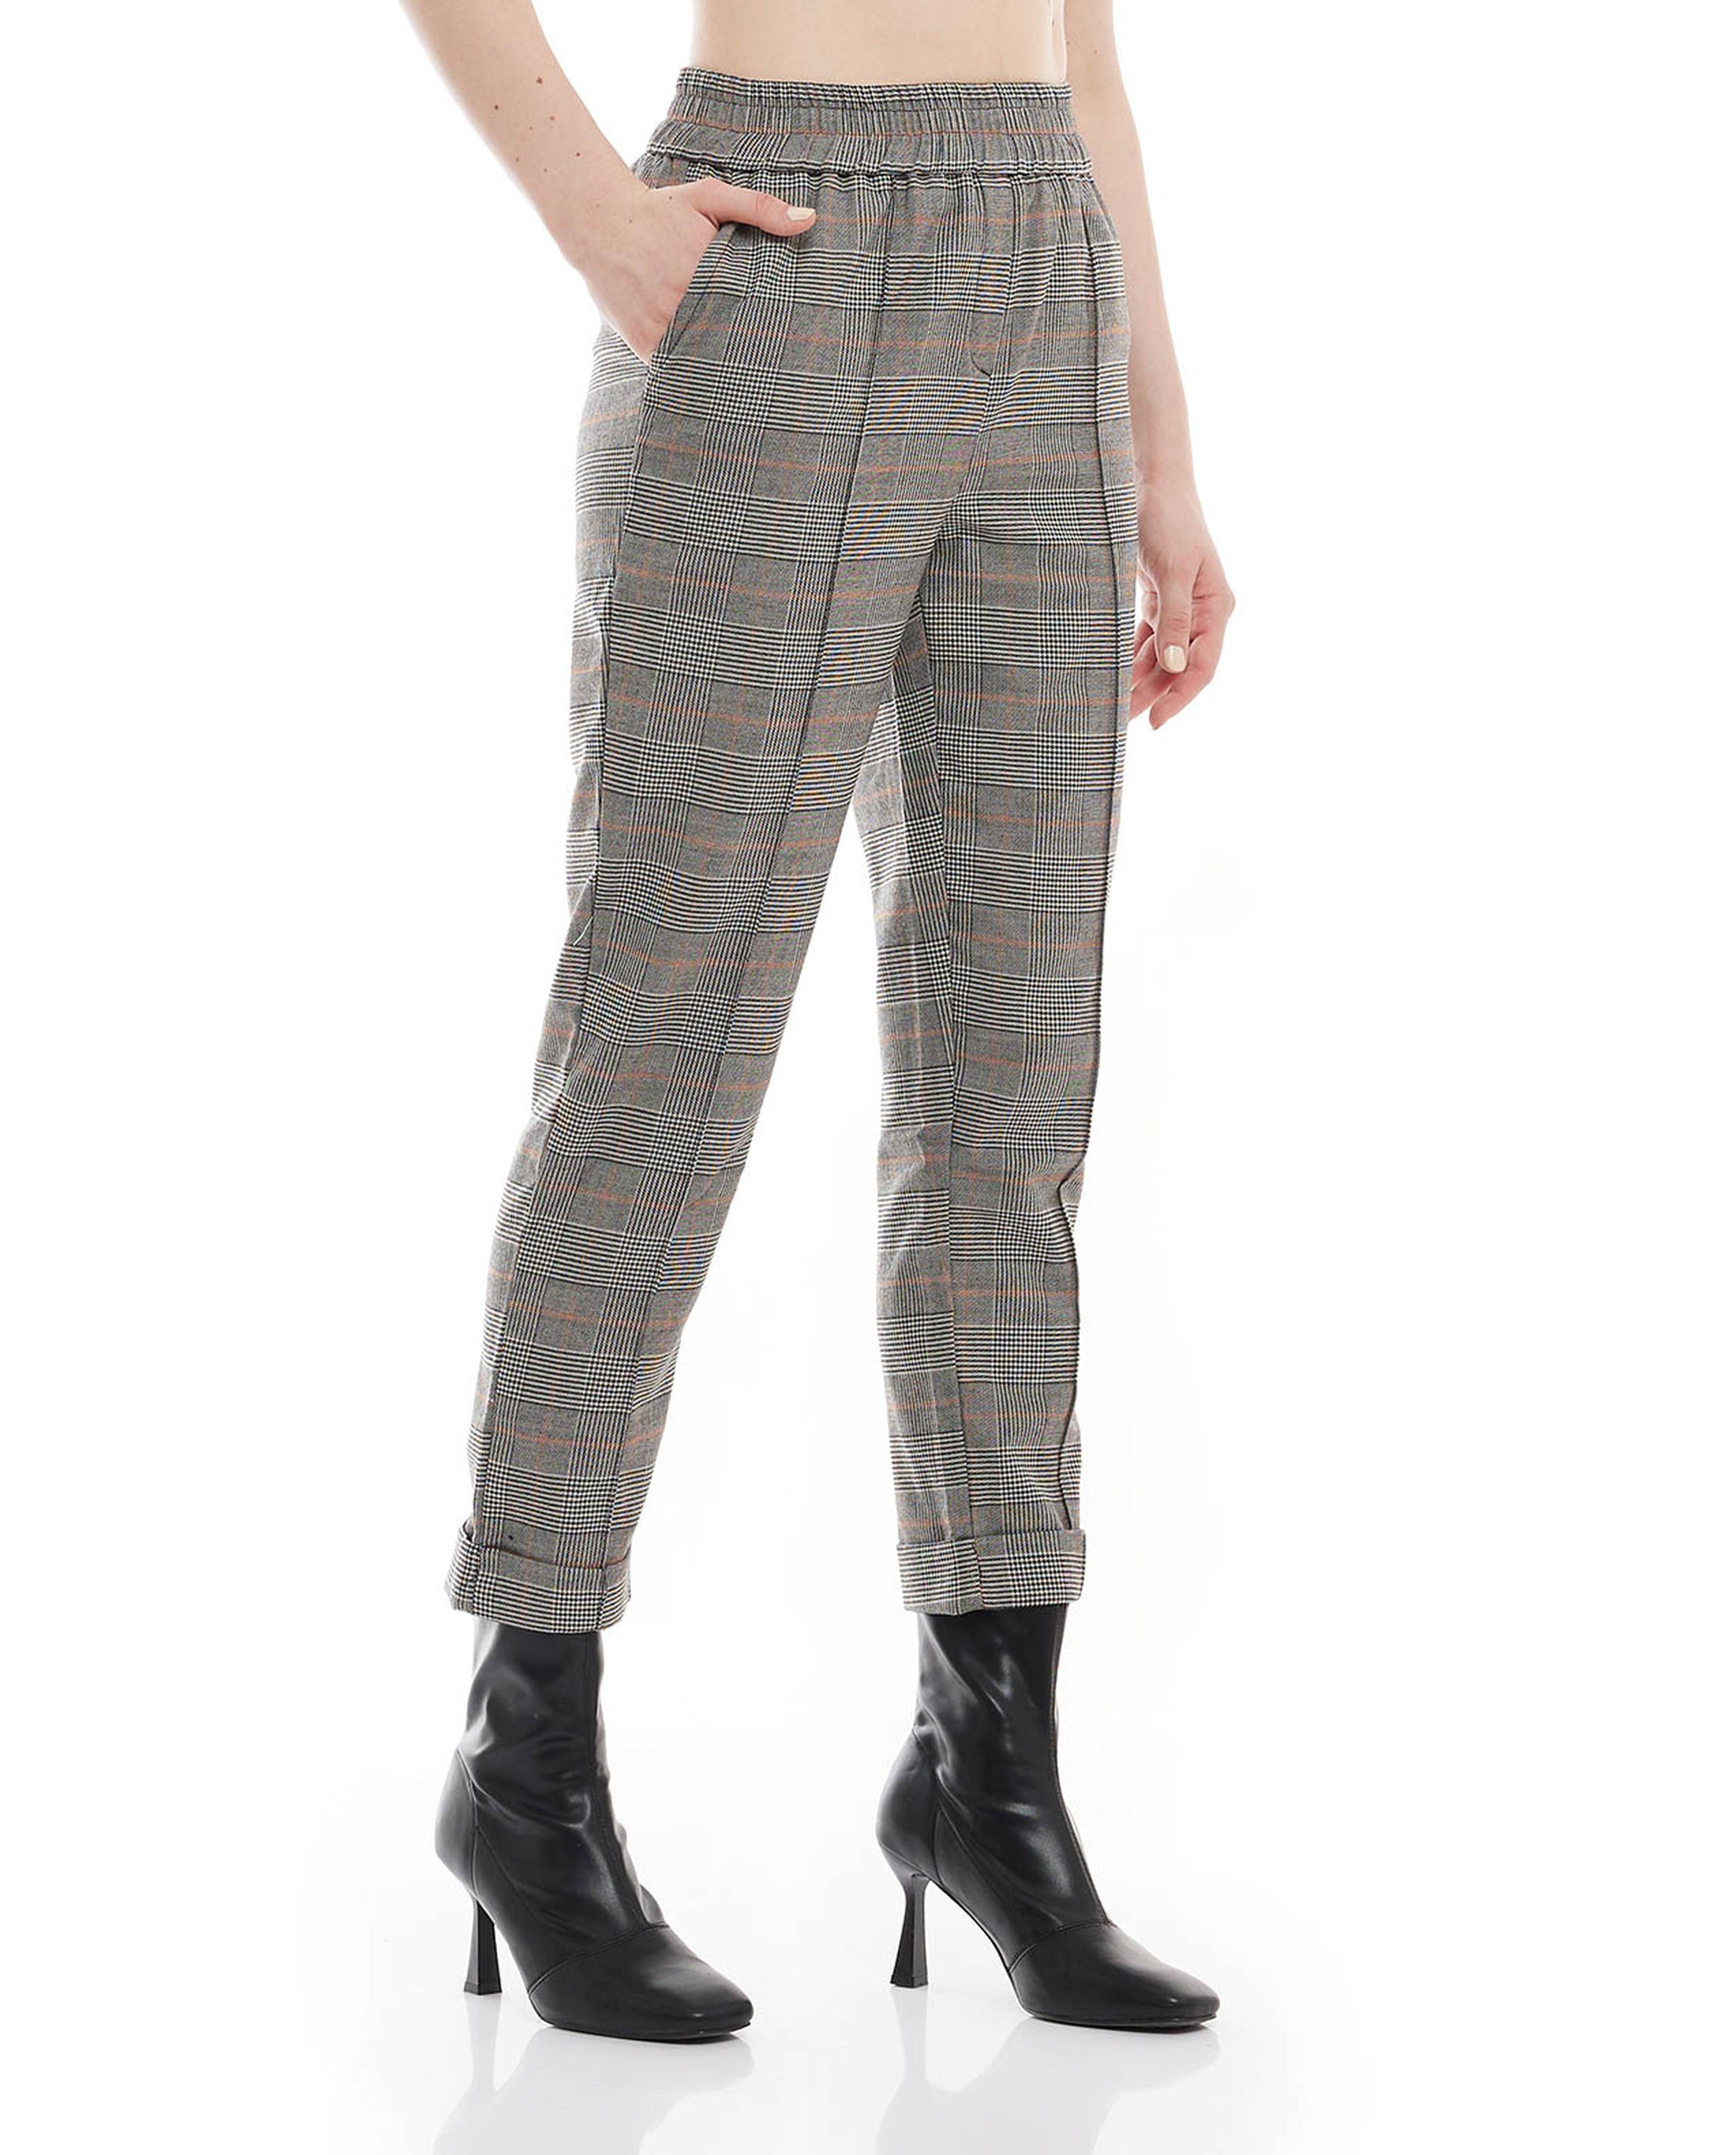 Plaid Tapered Pants with Elastic Waist